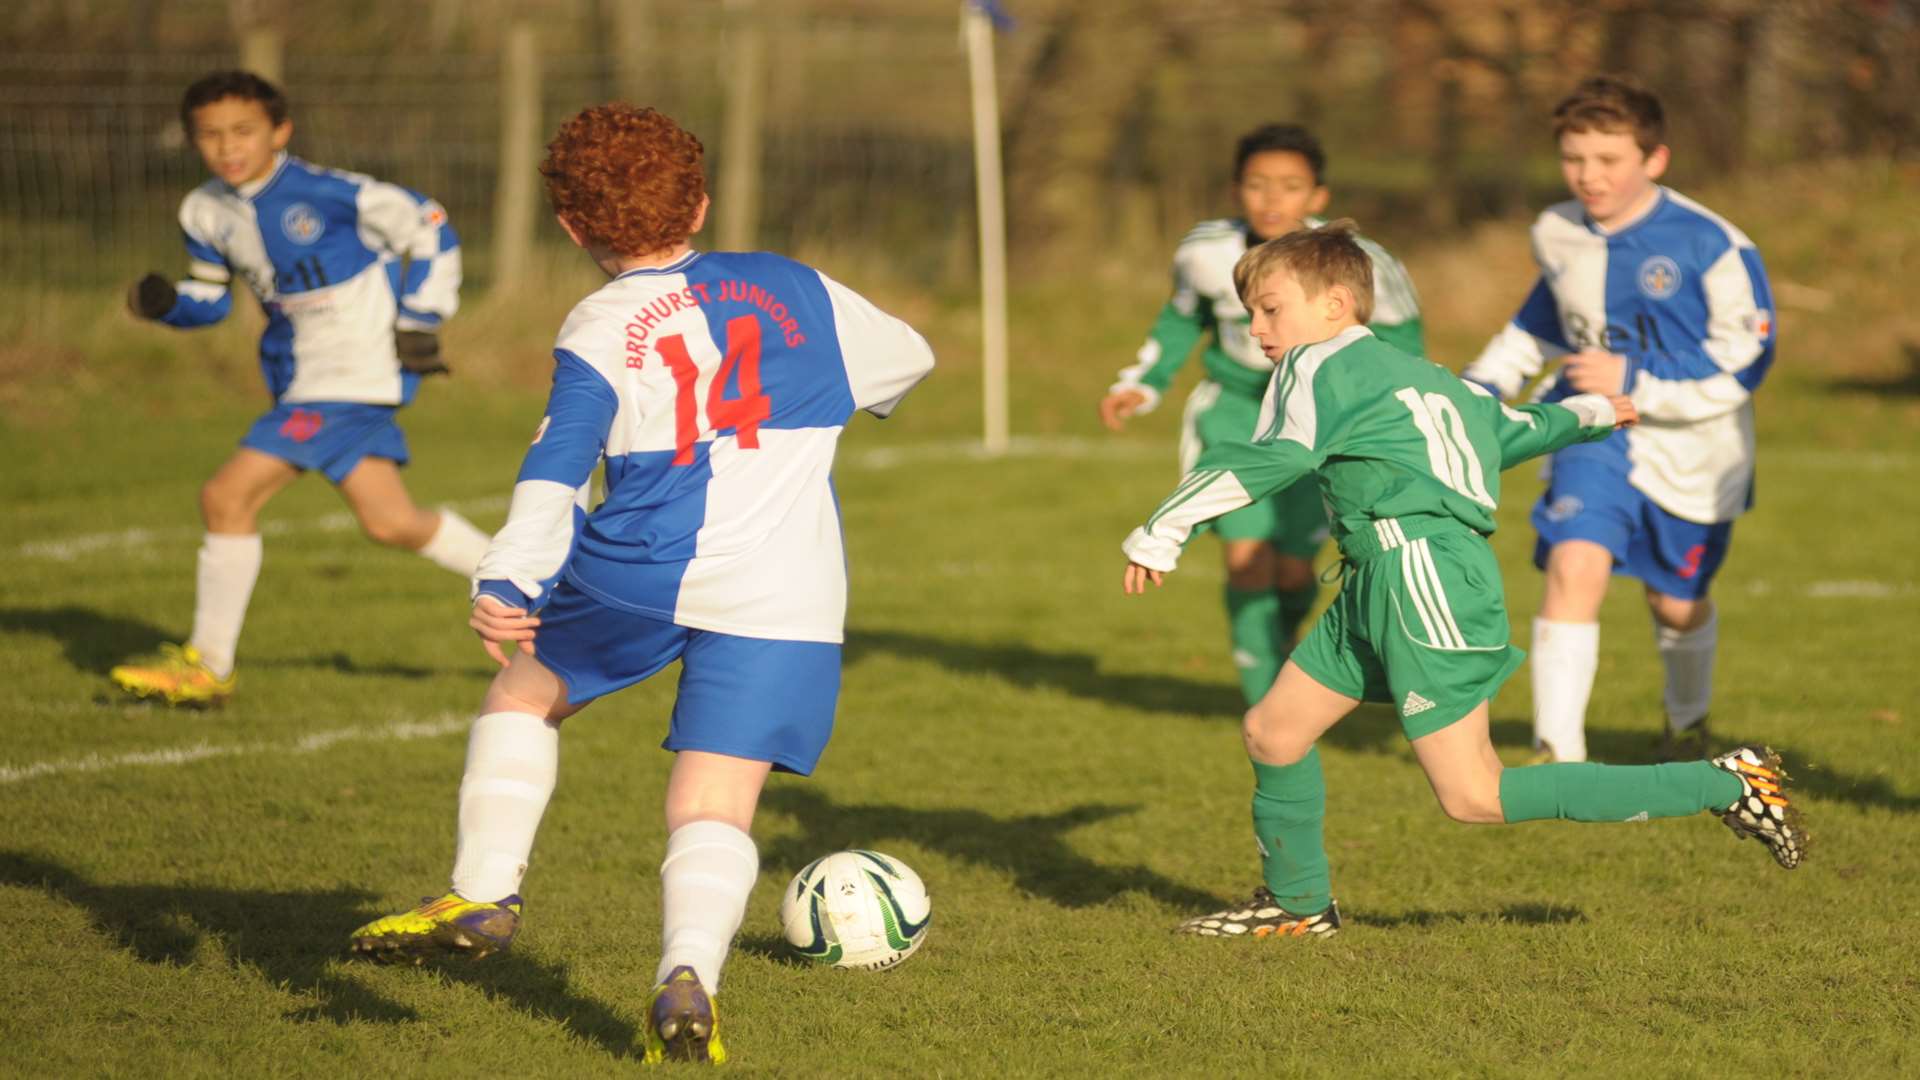 Bredhurst Juniors under-12s, blue and white, take on Horsted Youth in Division 2 Picture: Steve Crispe